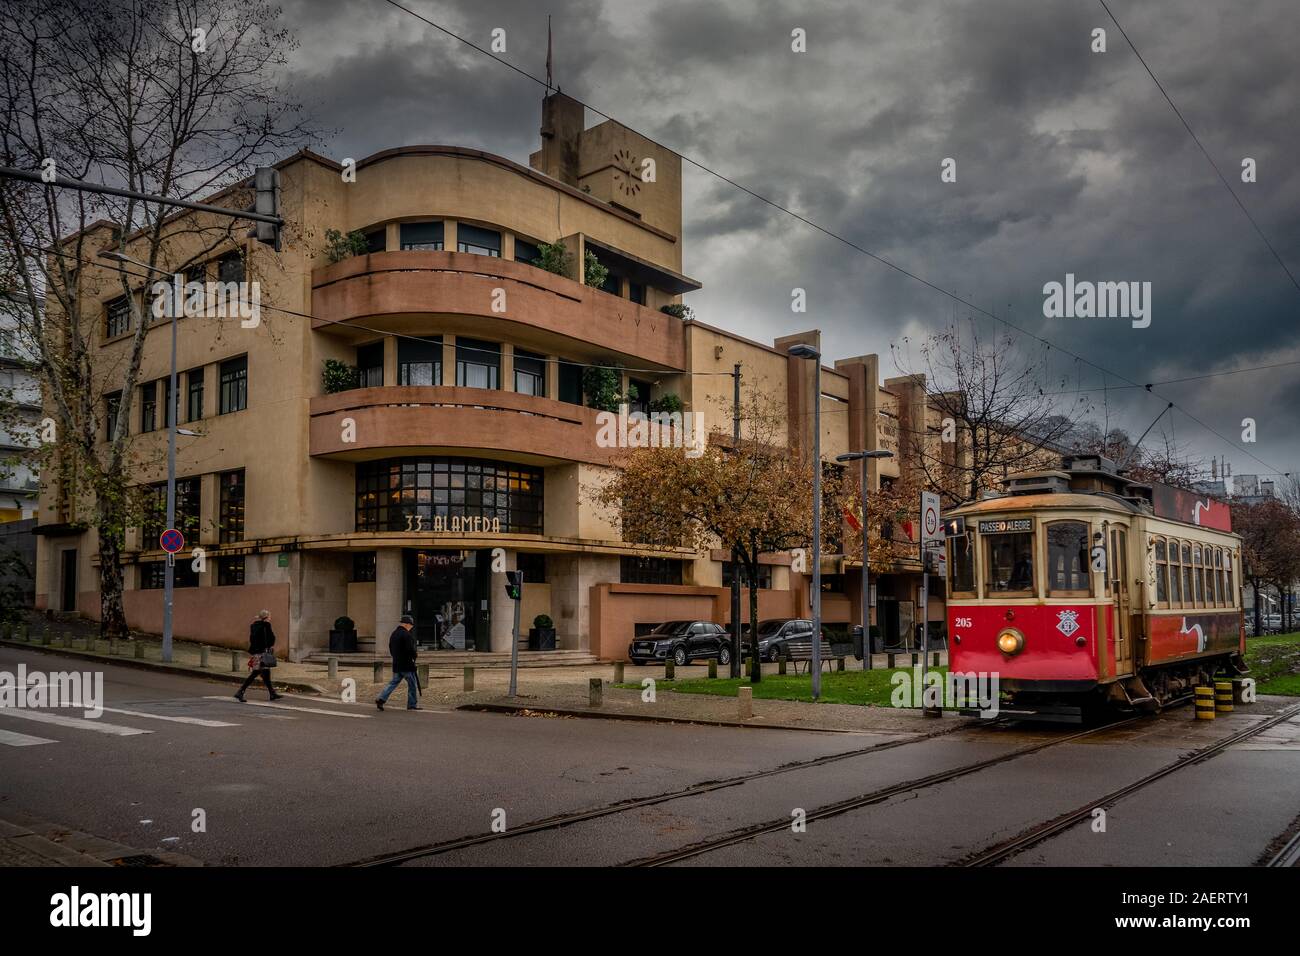 Red historic tram street car passing by an original Art Deco building in Porto Portugal Stock Photo